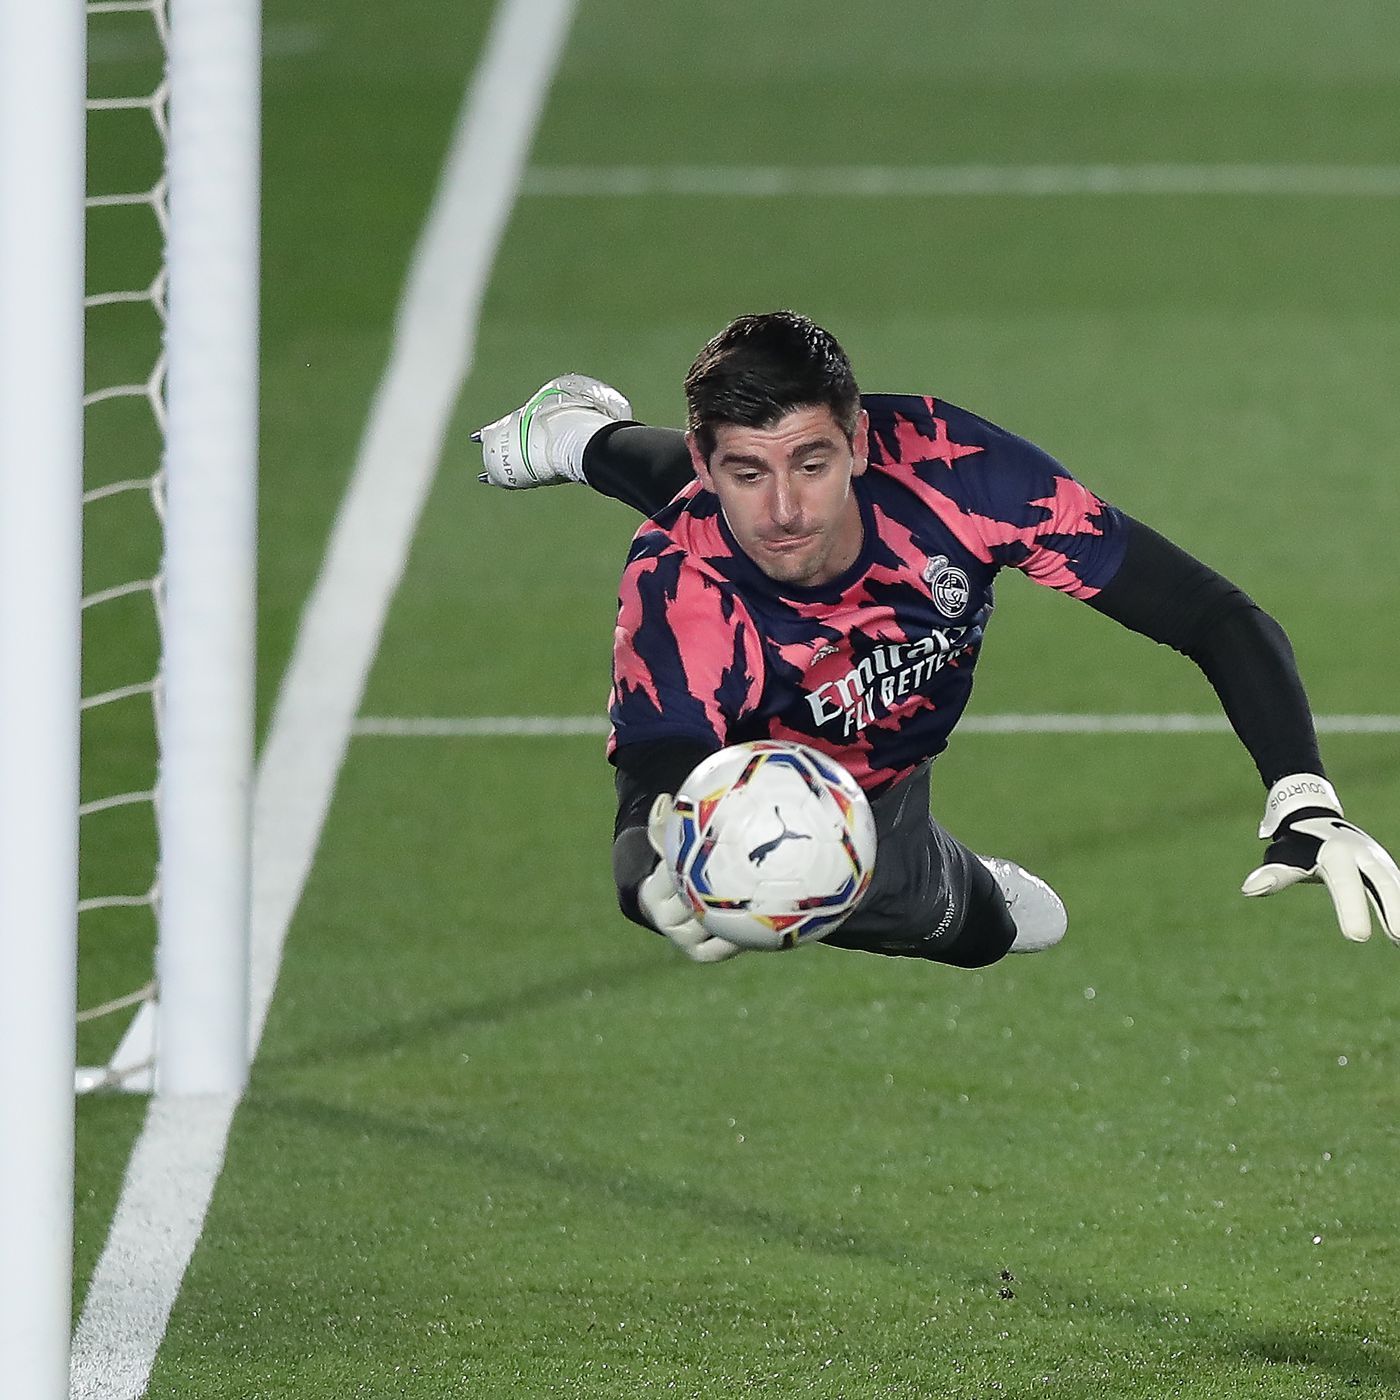 A Statistical Look at Thibaut Courtois' Season